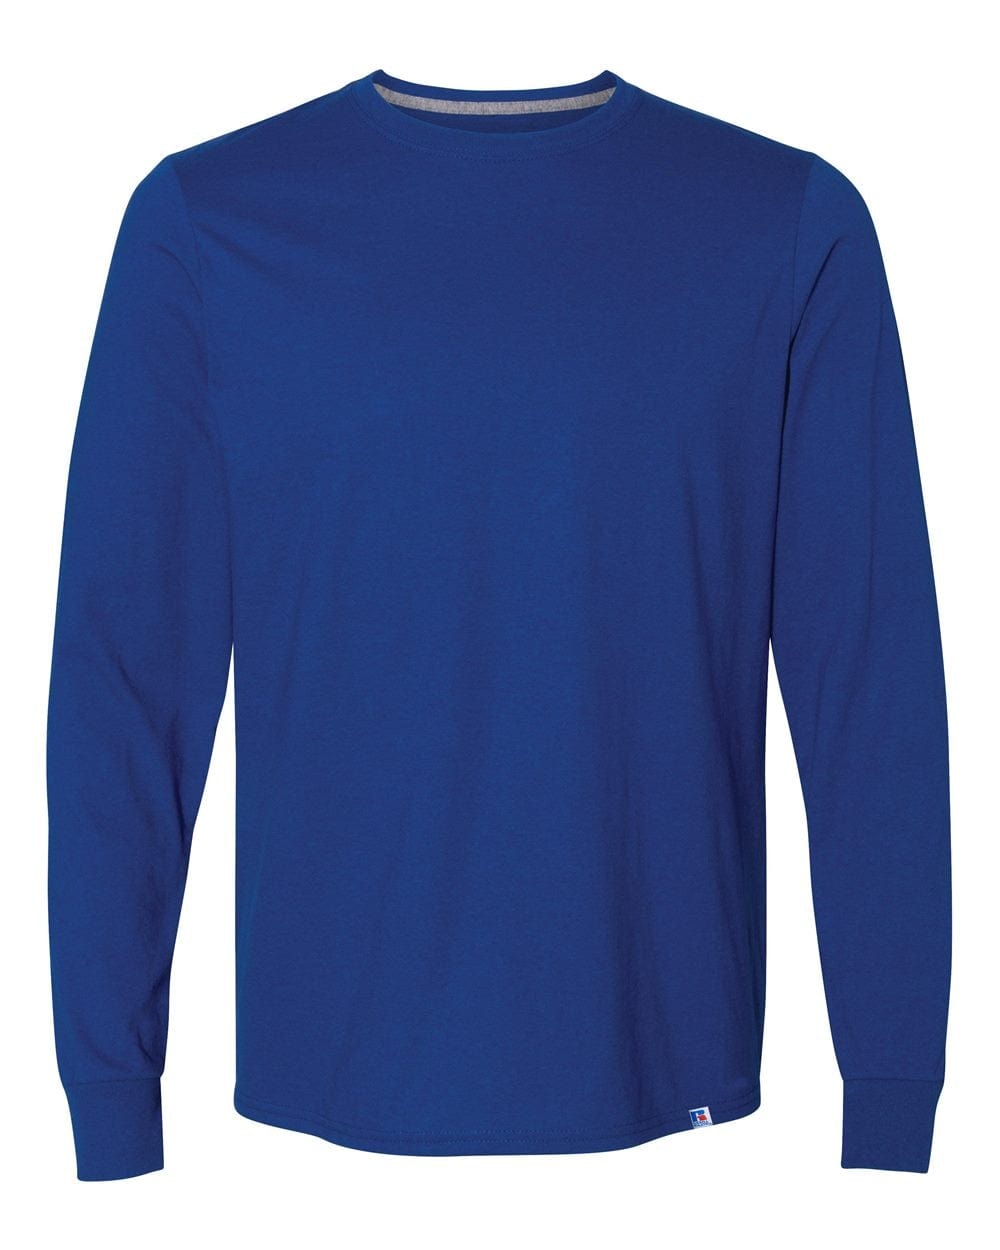 Russell Athletic T-shirts S / Royal Russell Athletic - Men's Essential Long Sleeve 60/40 Performance Tee